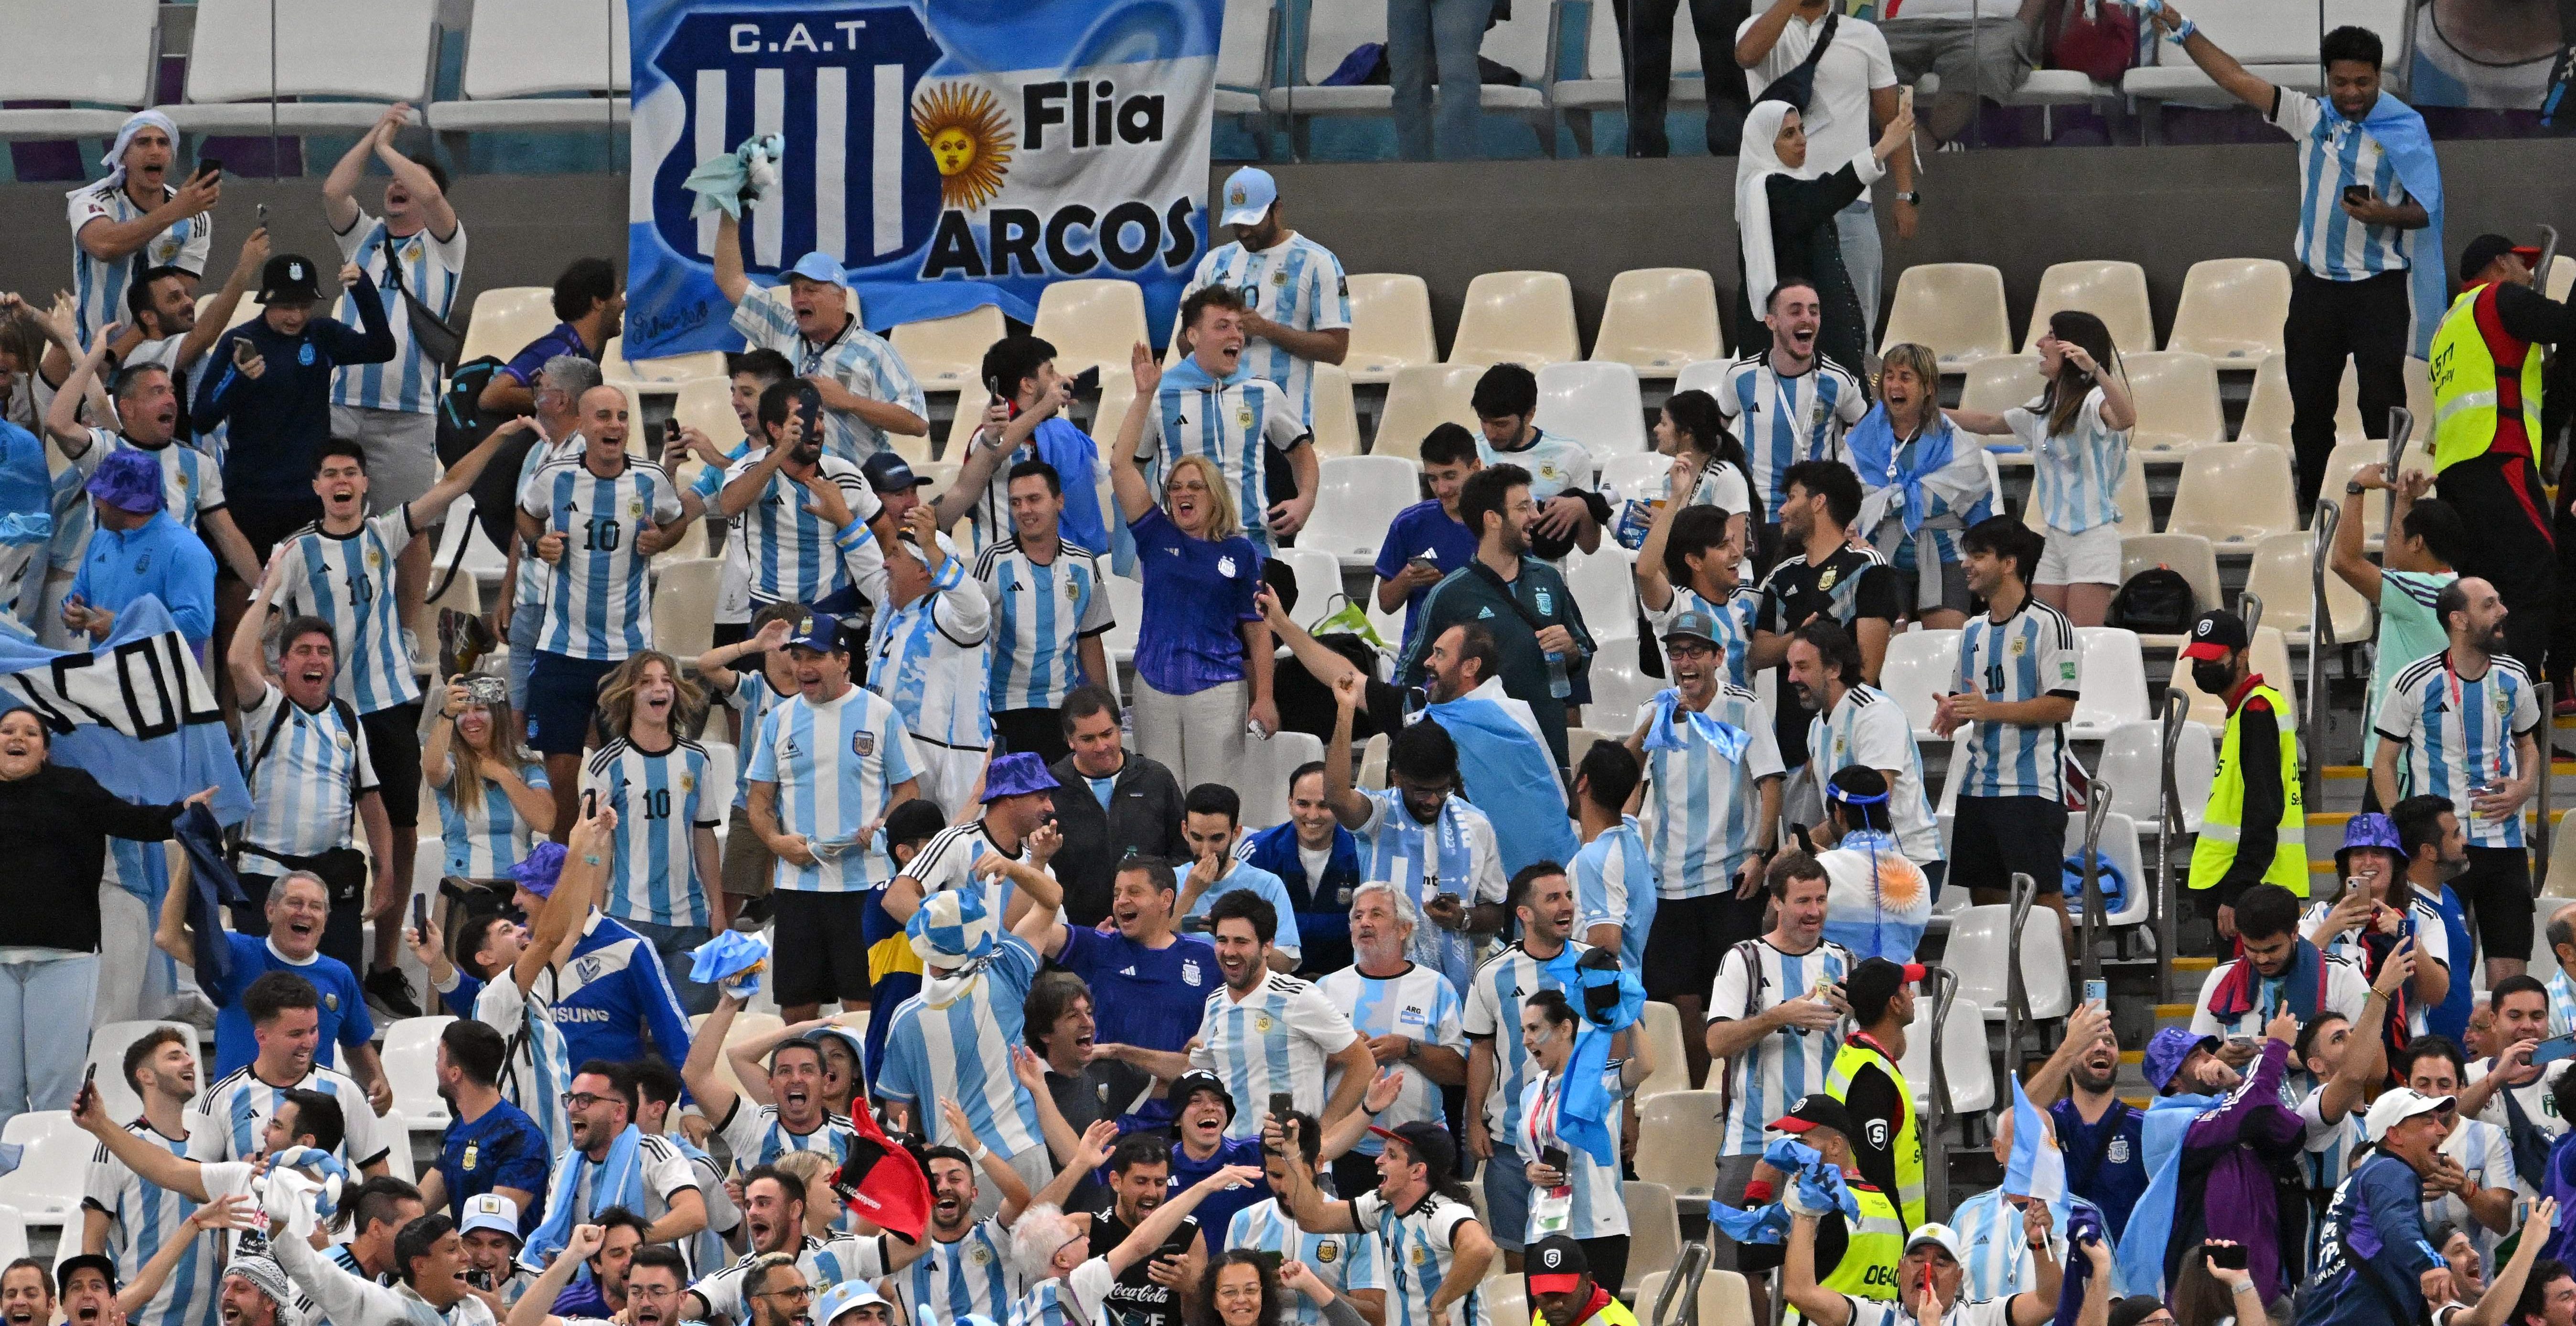 Argentine Fans in Lusail Stadium Celebrate Brazil's World Cup Loss